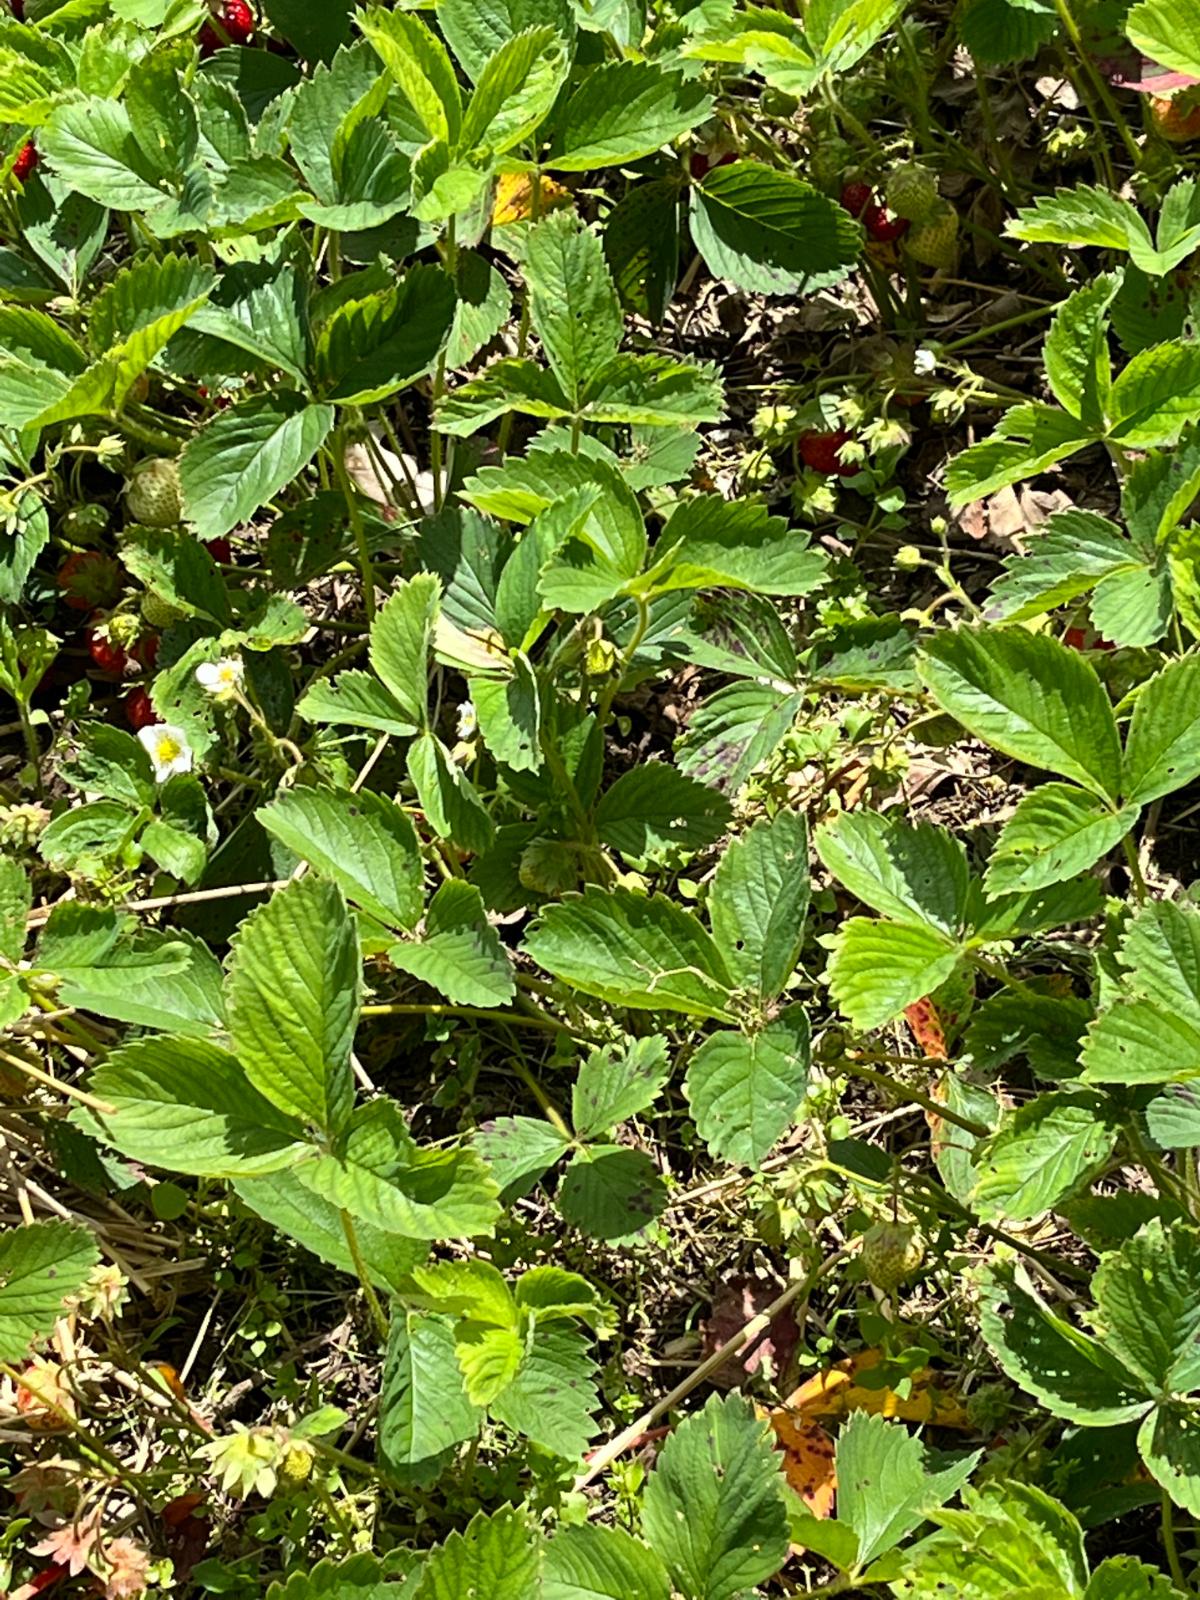 Strawberry patch in early June